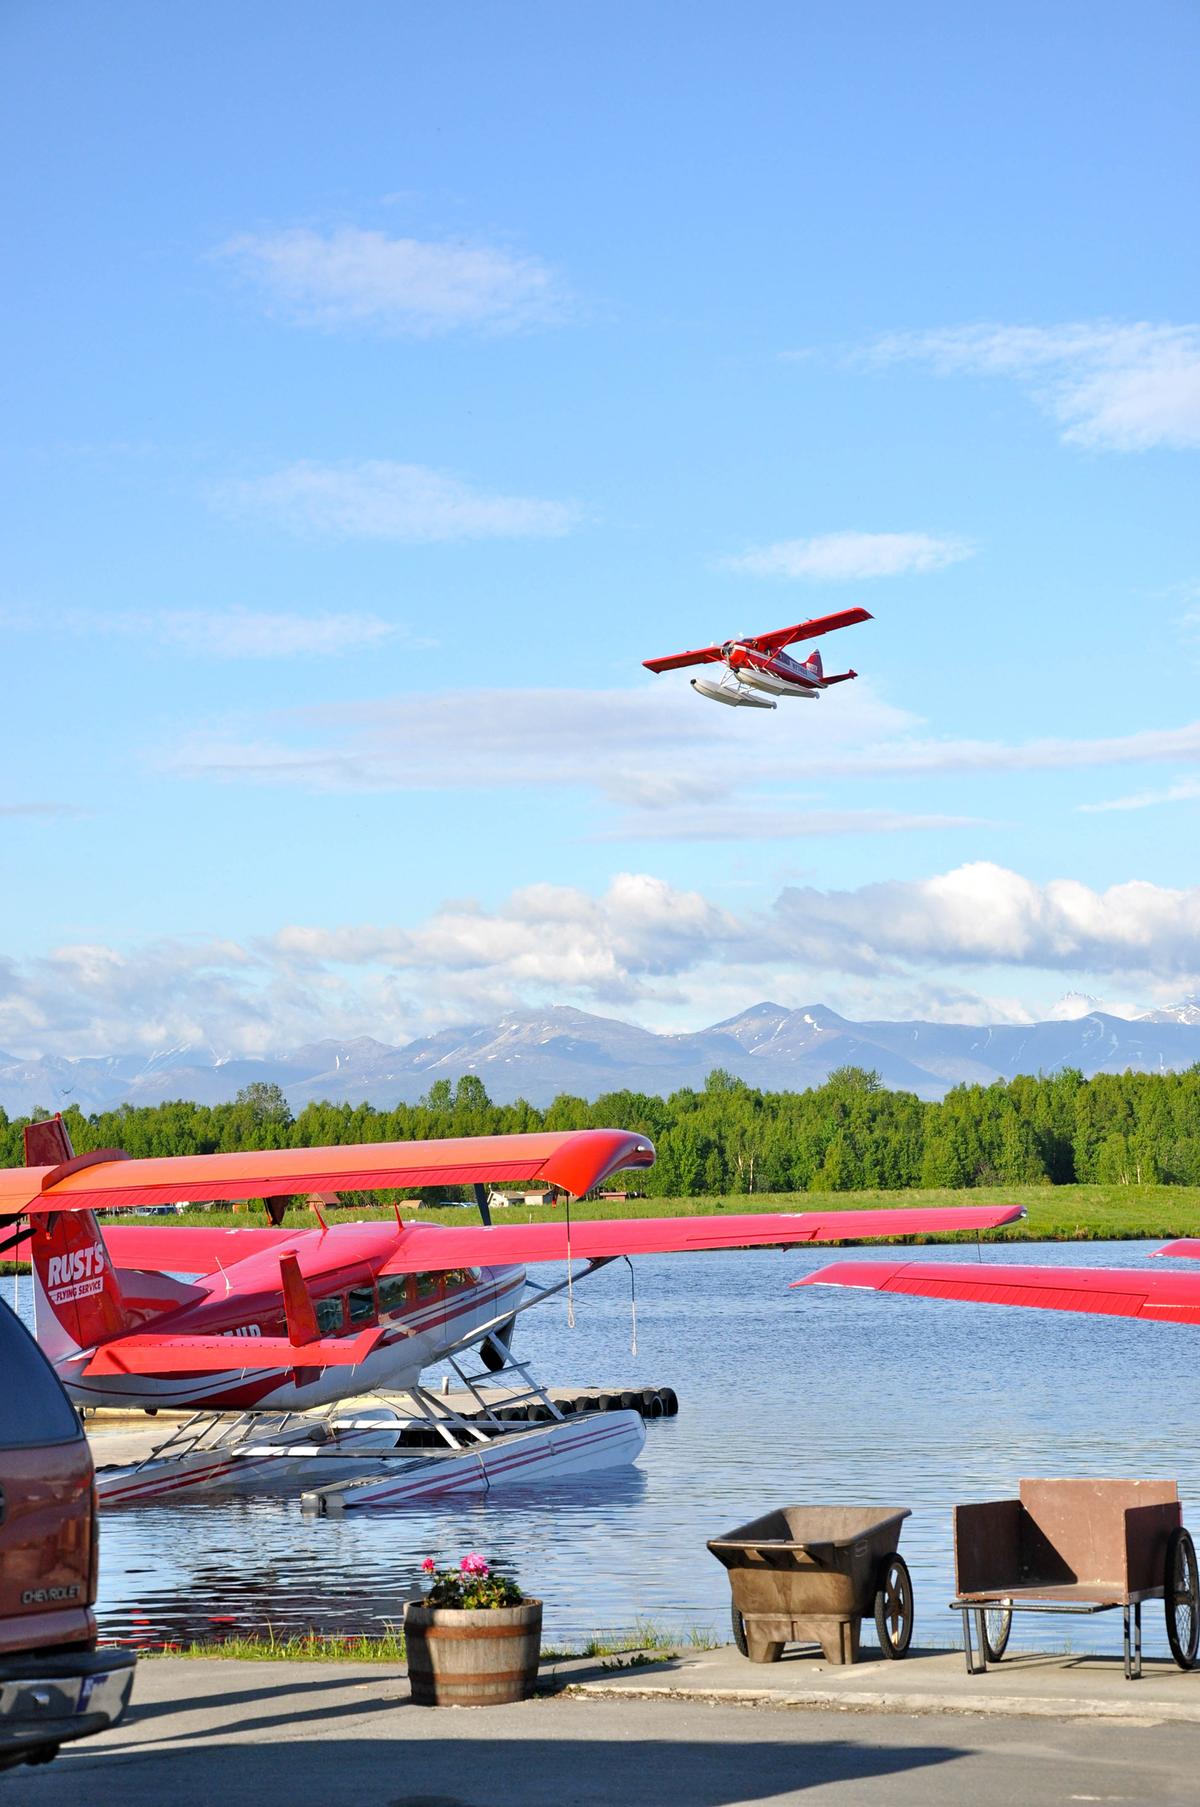 A Rust's Flying Service float plane departs Lake Hood in Anchorage, Alaska. (Roy Neese/Visit Anchorage)